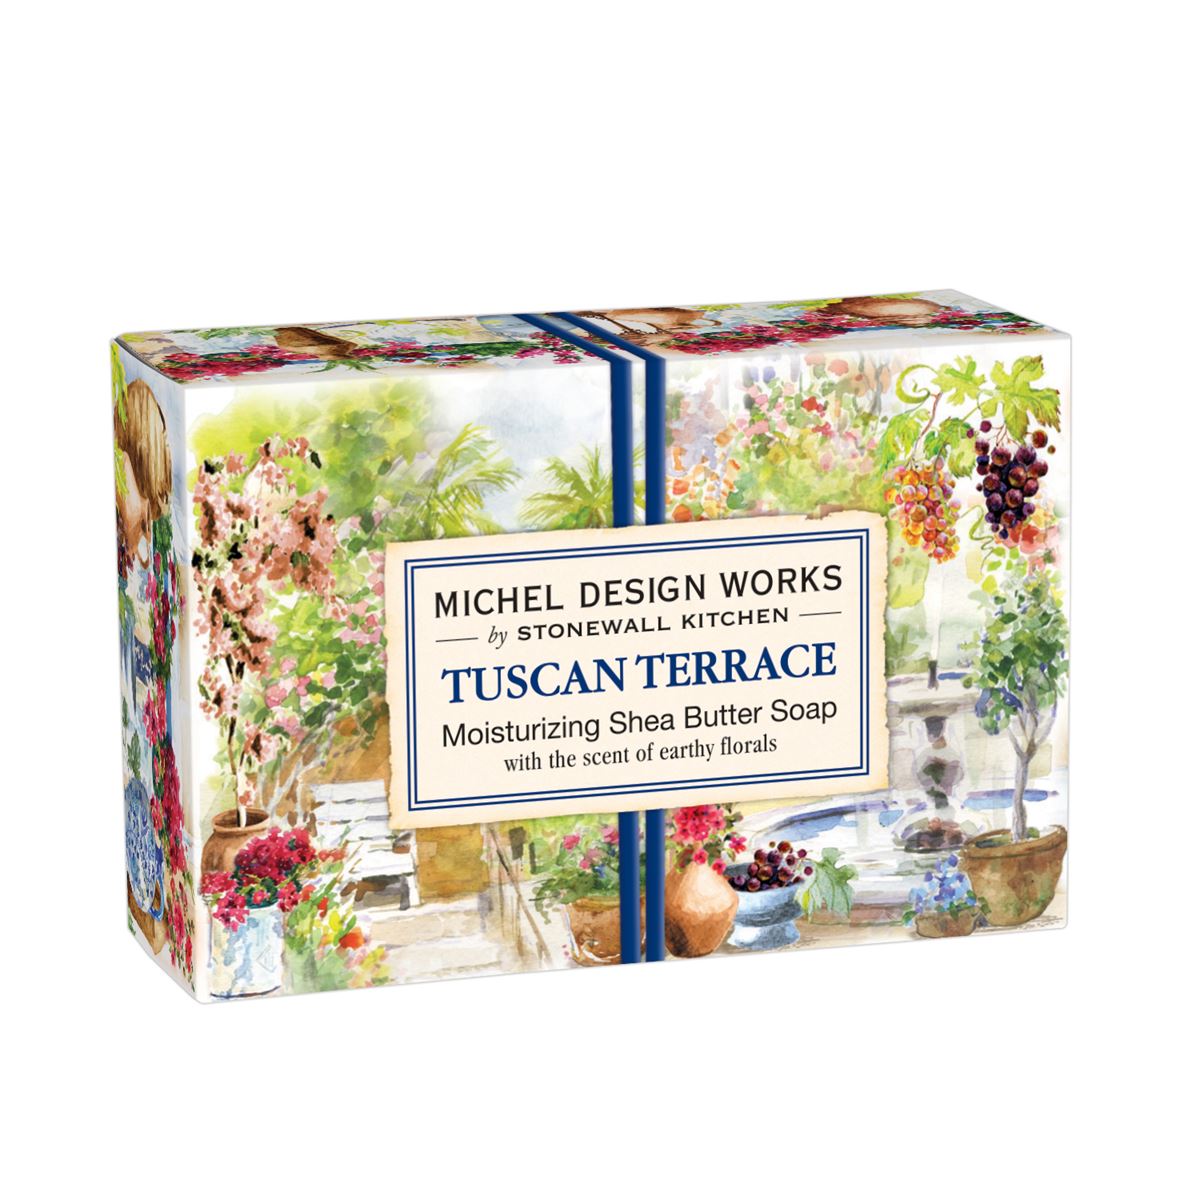 Michel Design Works Tuscan Terrace Single Boxed Soap